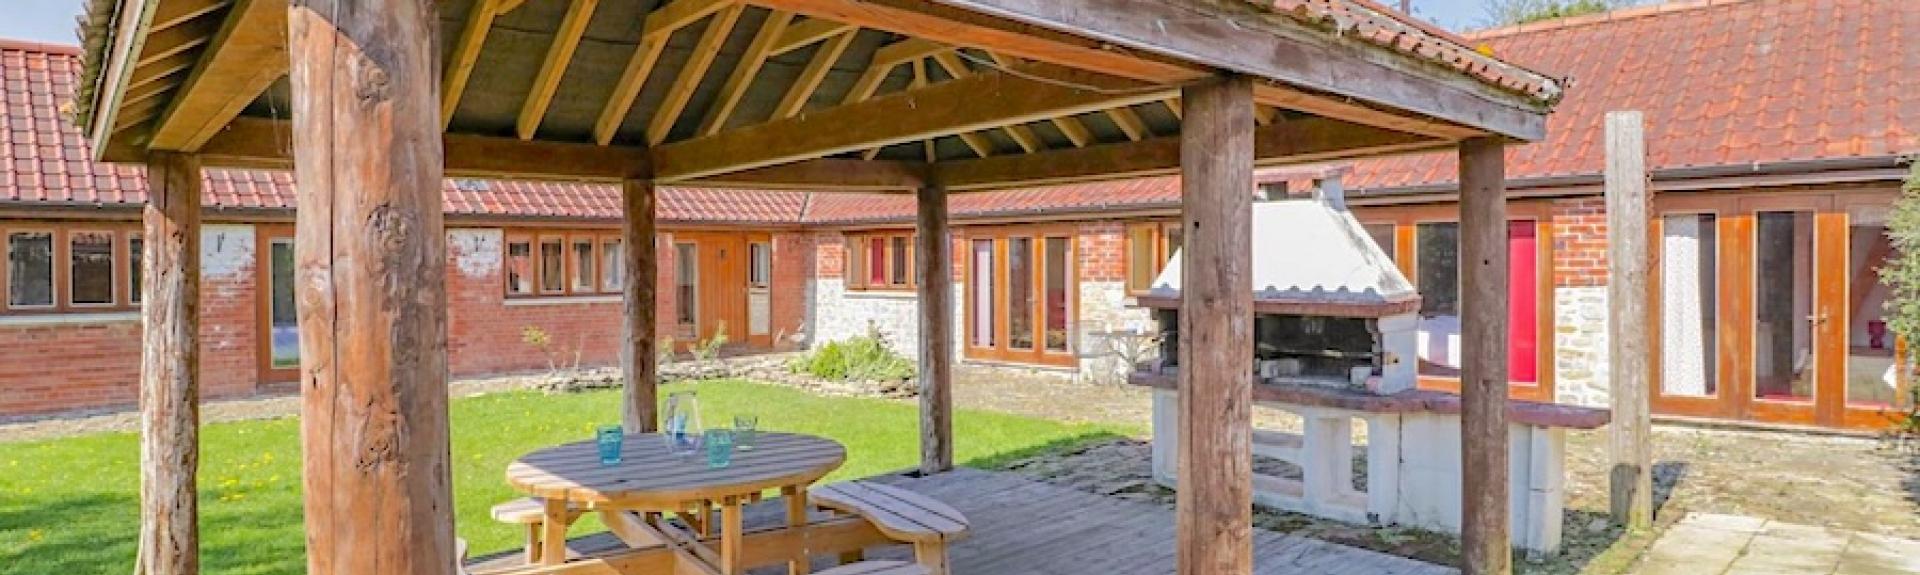 A covered bbq area in a garden of a barn conversion.